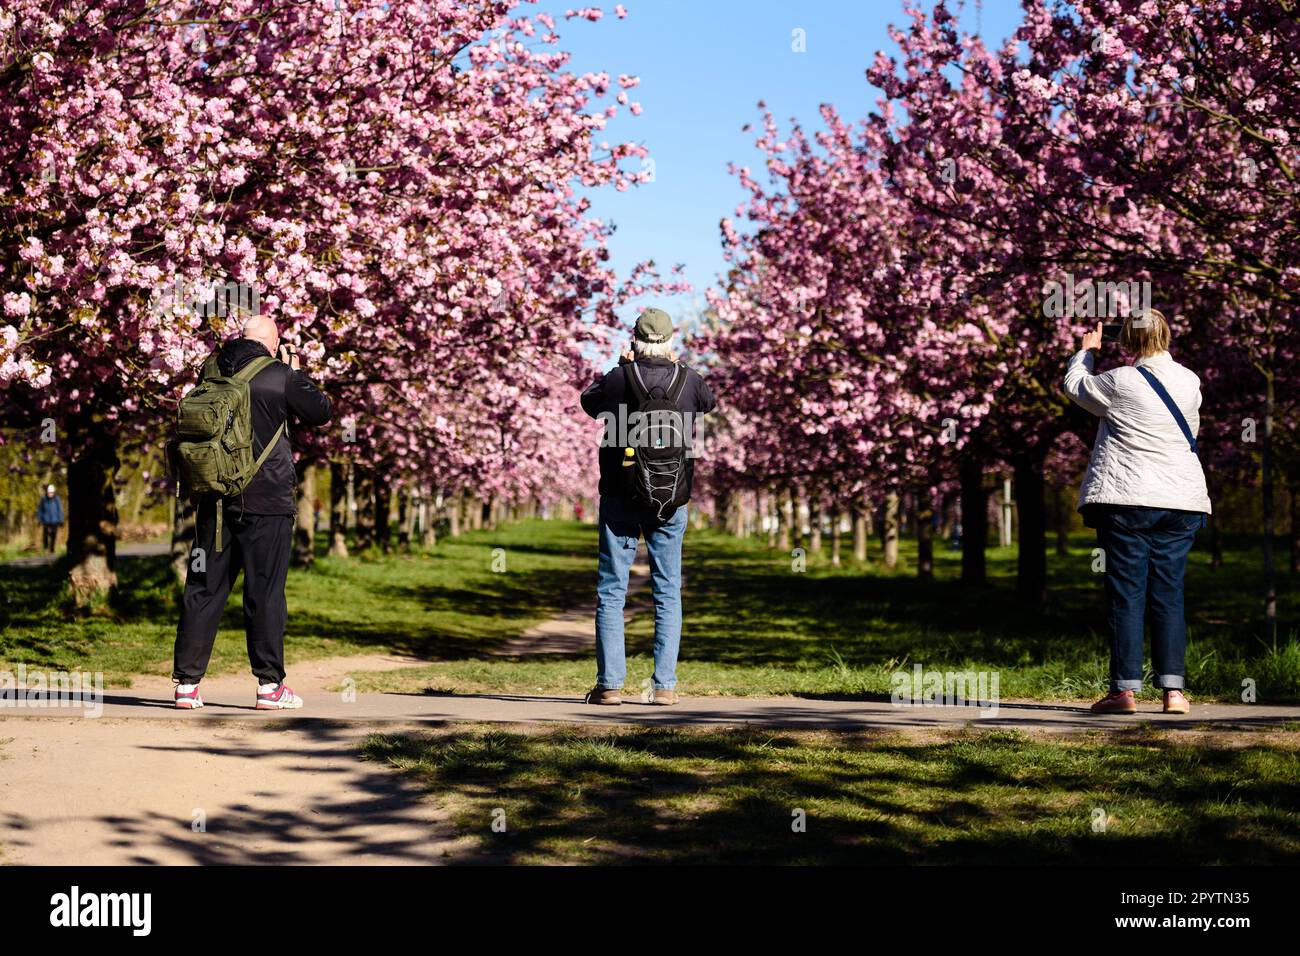 , , April 20, 2020: Three people can be seen photographing the colourful blossoms of the trees of the TV-Asahi cherry blossom avenue in the morning sun. The creation of the Cherry Blossom Avenue was initiated by TV-Asahi, one of the major Japanese television stations, on the occasion of the reunification of Germany. The cherry trees were planted between 1990-2010. Almost 10,000 Japanese cherry trees now stand on the former Wall strip and other selected places that were particularly affected by the division of Germany. In the Teltow area there are about 1,100 cherry trees. Stock Photo